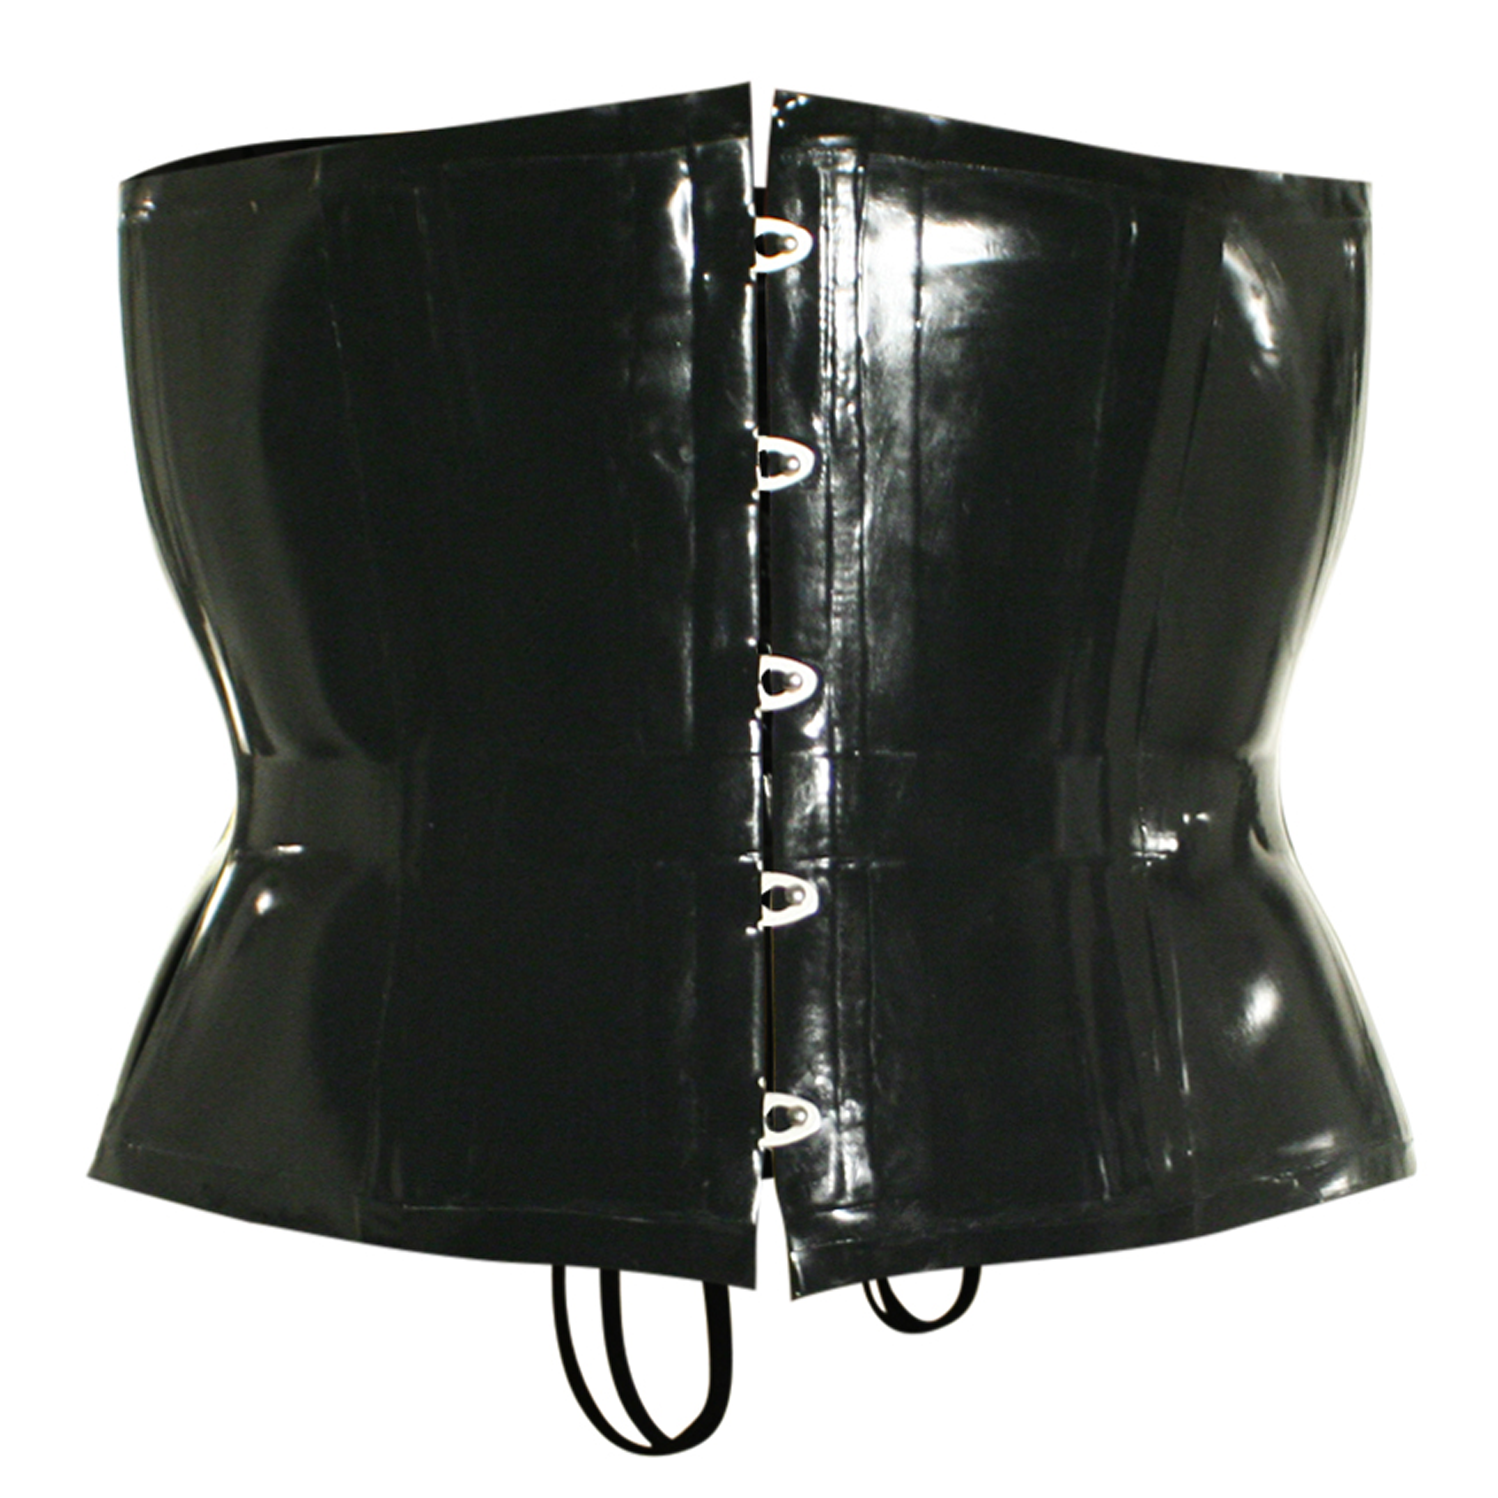 Latex Corset a Classic Over Bust Waist Cincher by Vex Clothing - Convex  Corset - Vex Latex